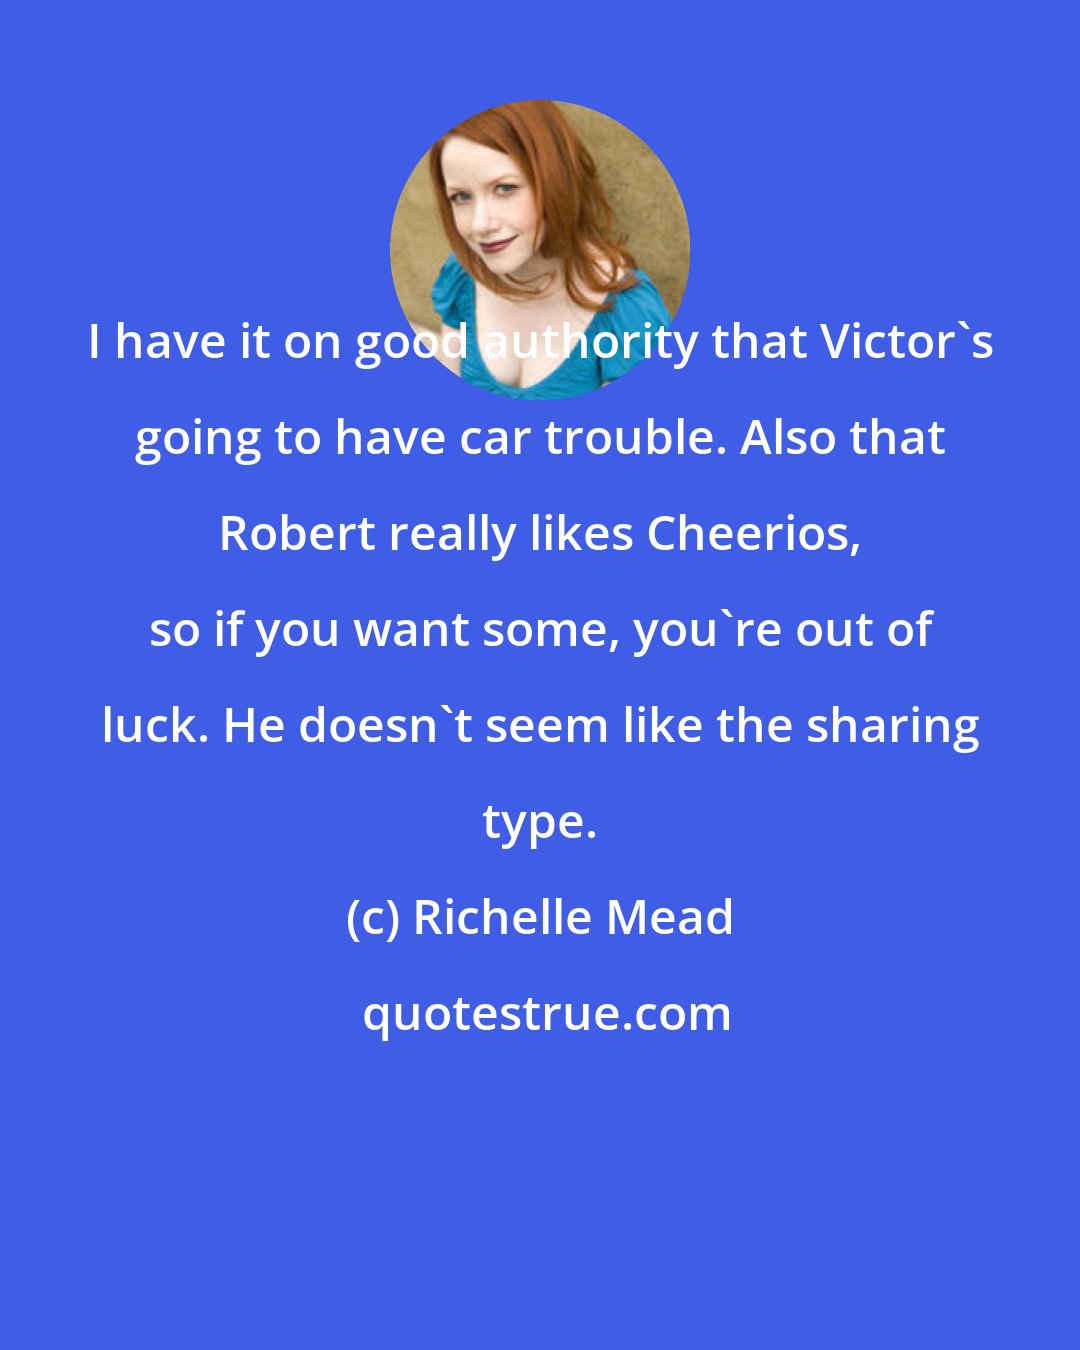 Richelle Mead: I have it on good authority that Victor's going to have car trouble. Also that Robert really likes Cheerios, so if you want some, you're out of luck. He doesn't seem like the sharing type.